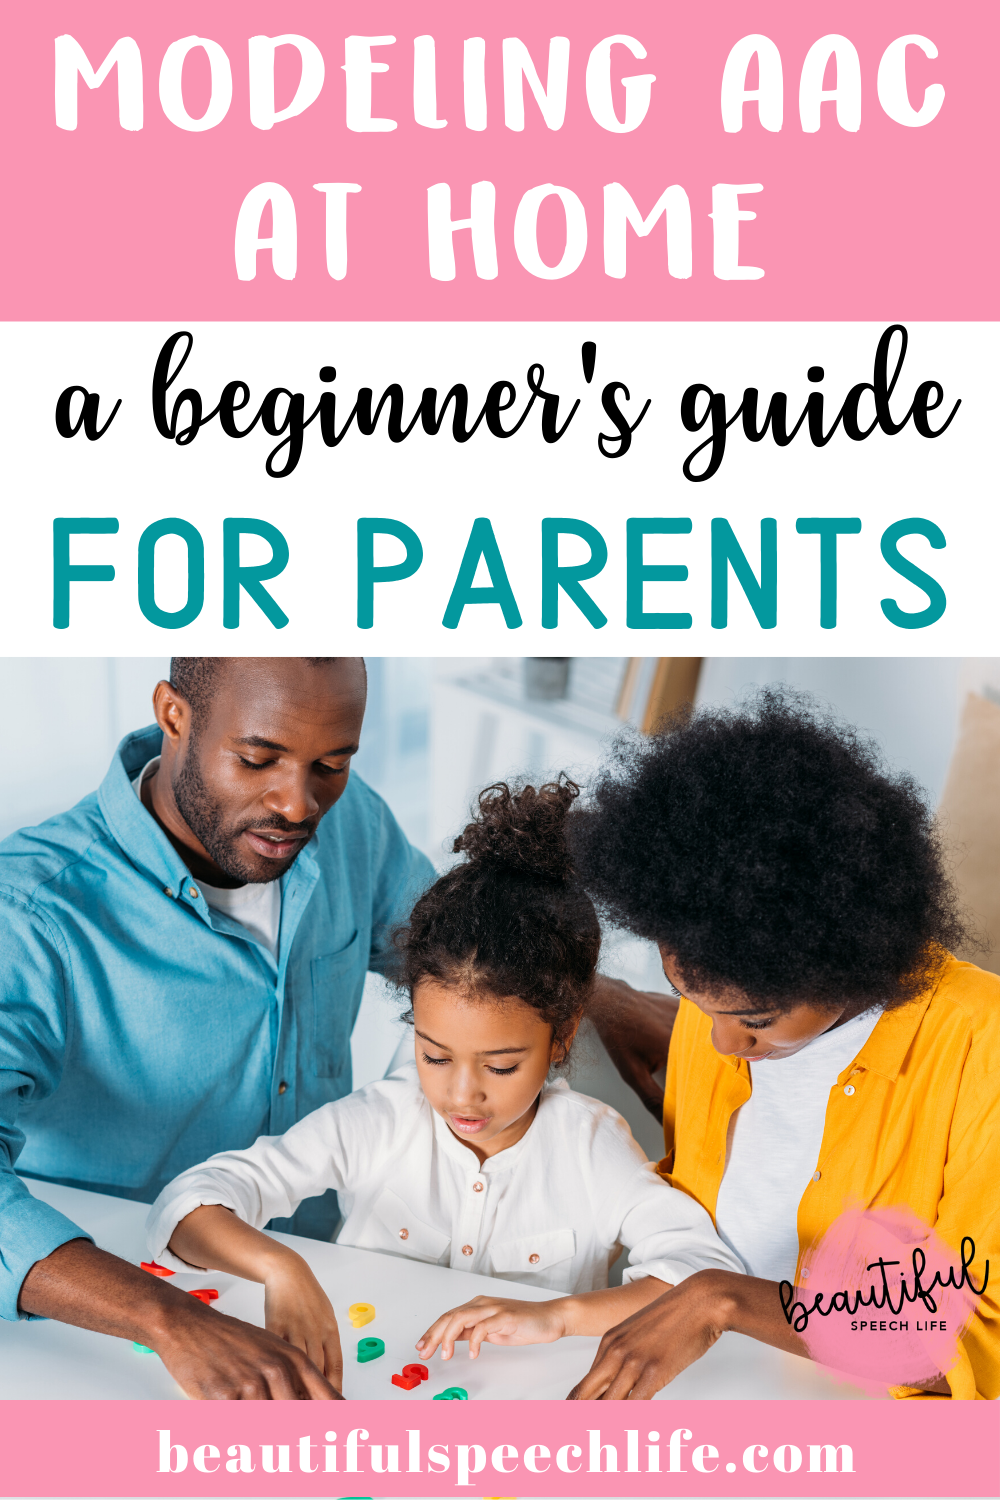 Modeling AAC at Home: a beginners guide for parents